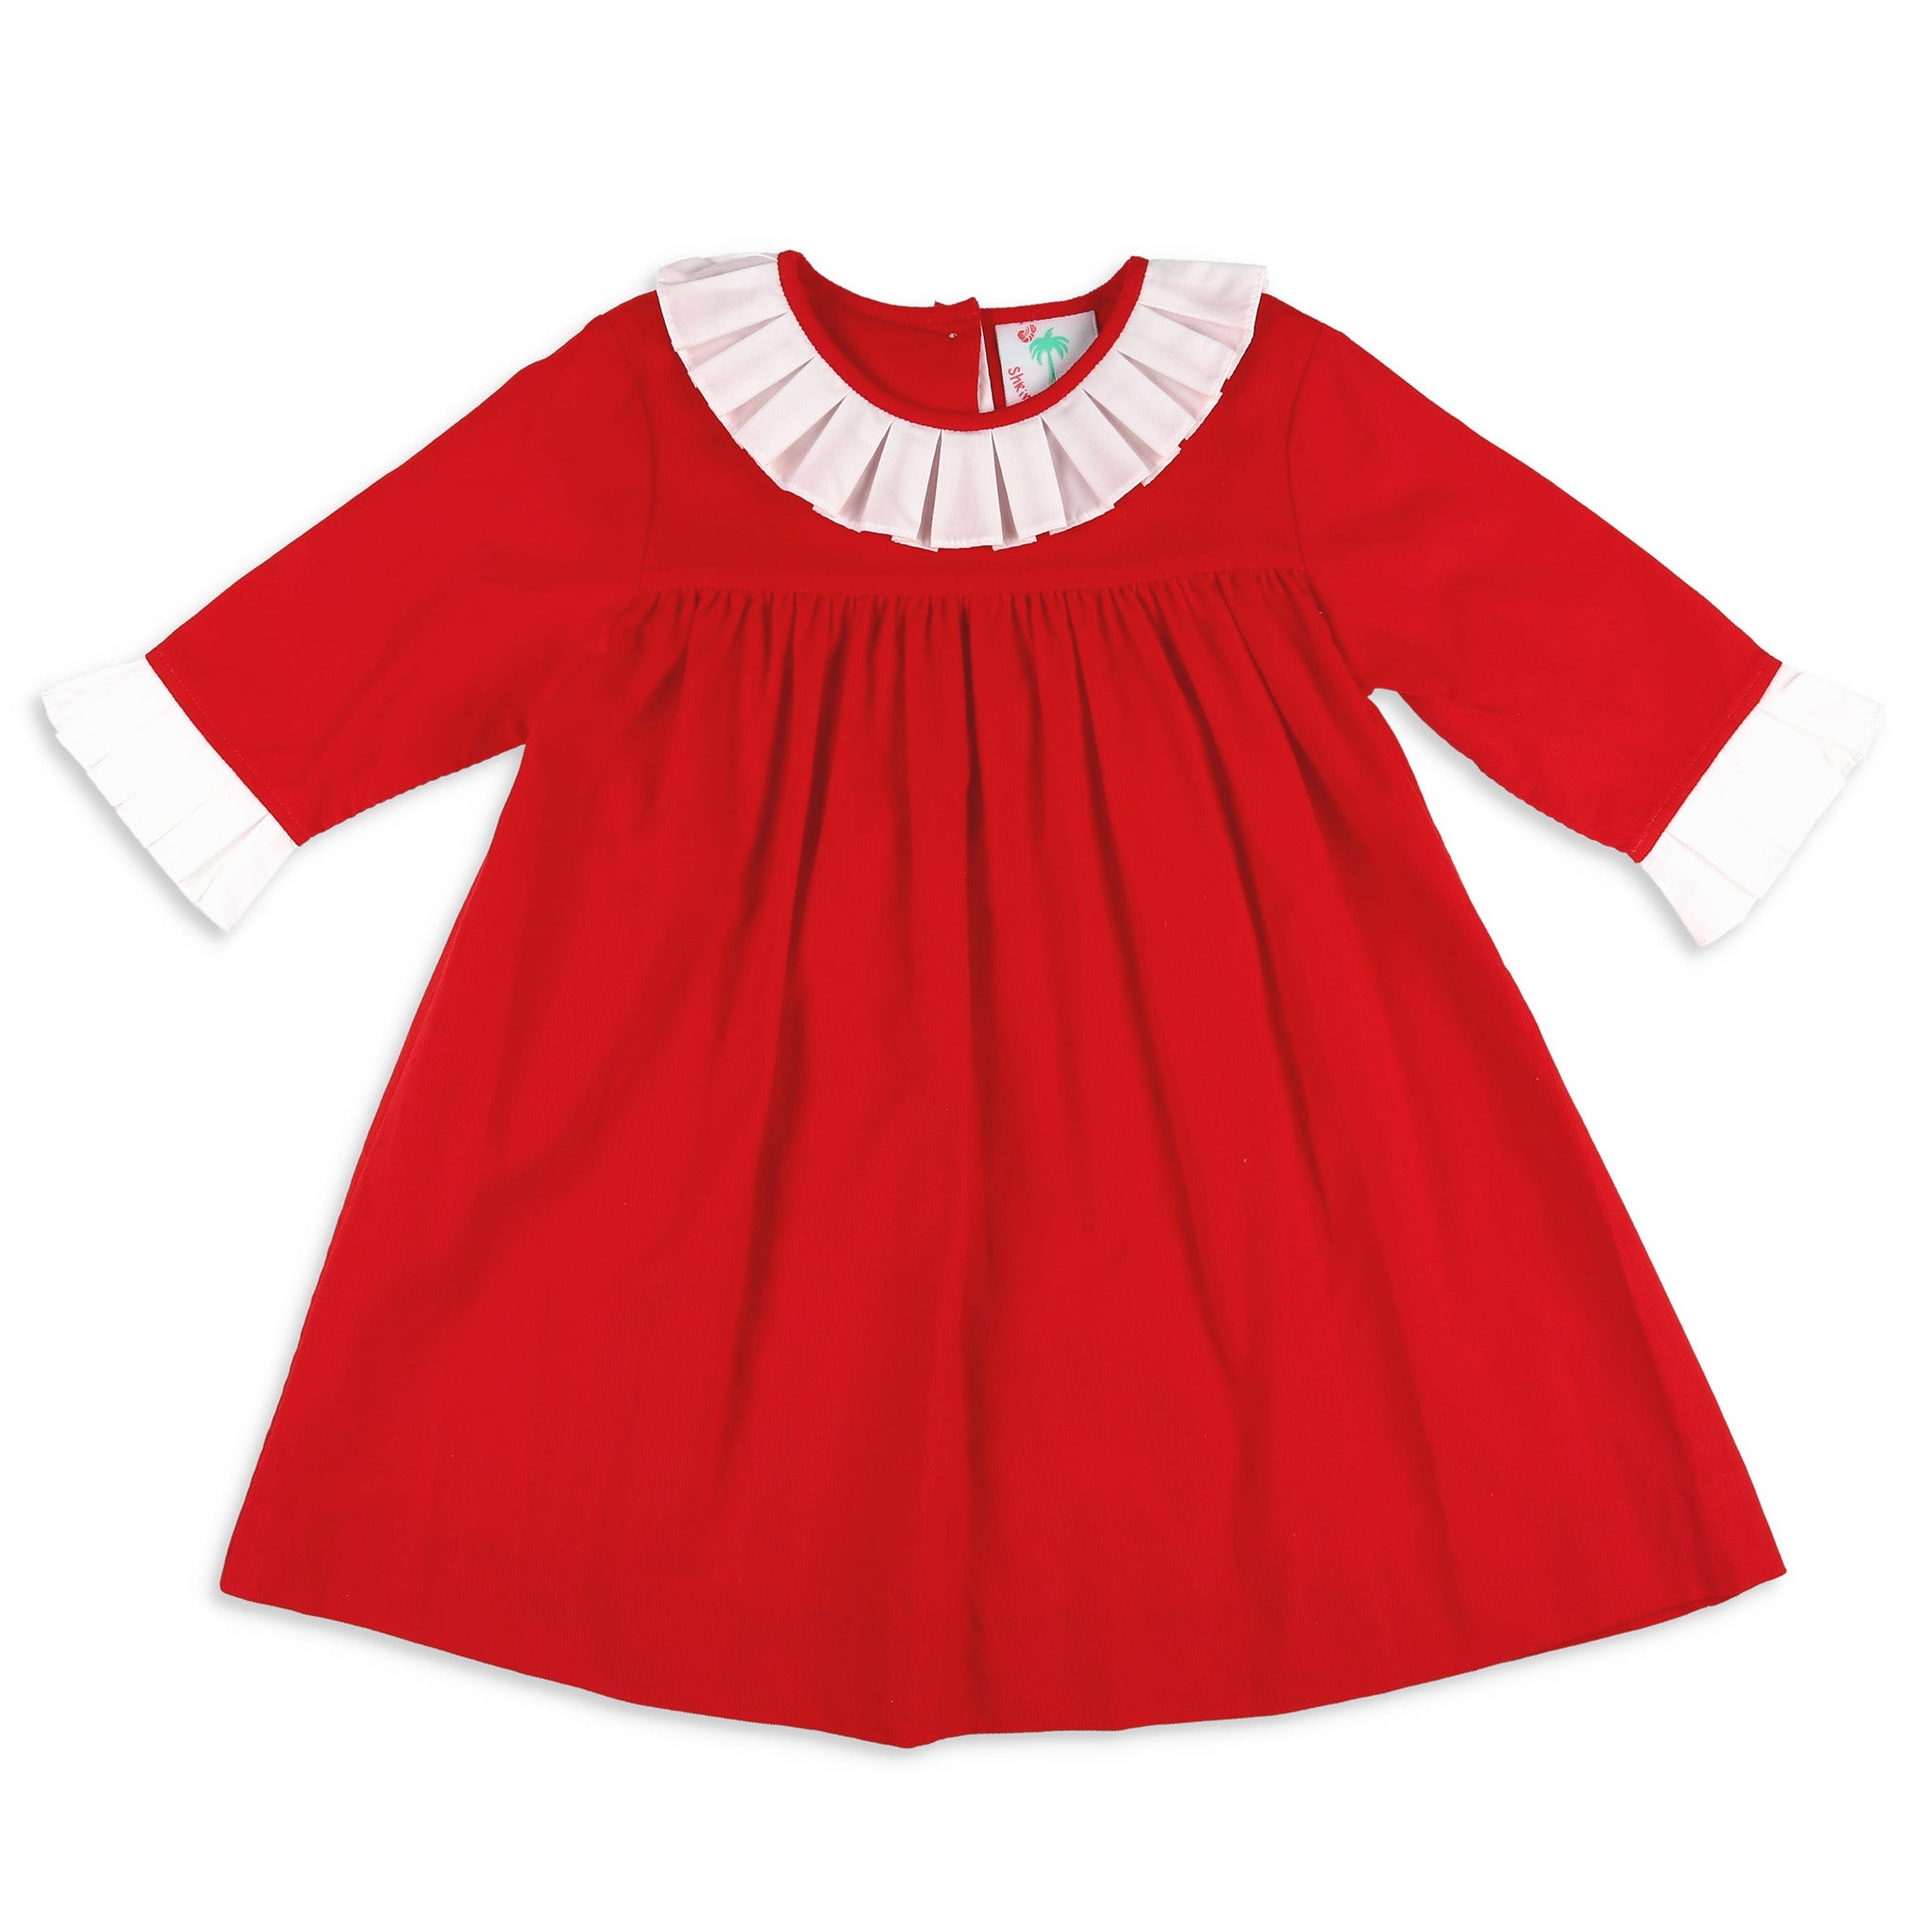 Red Cord Scarlett Dress - Shrimp and Grits Kids - Shrimp and Grits Kids